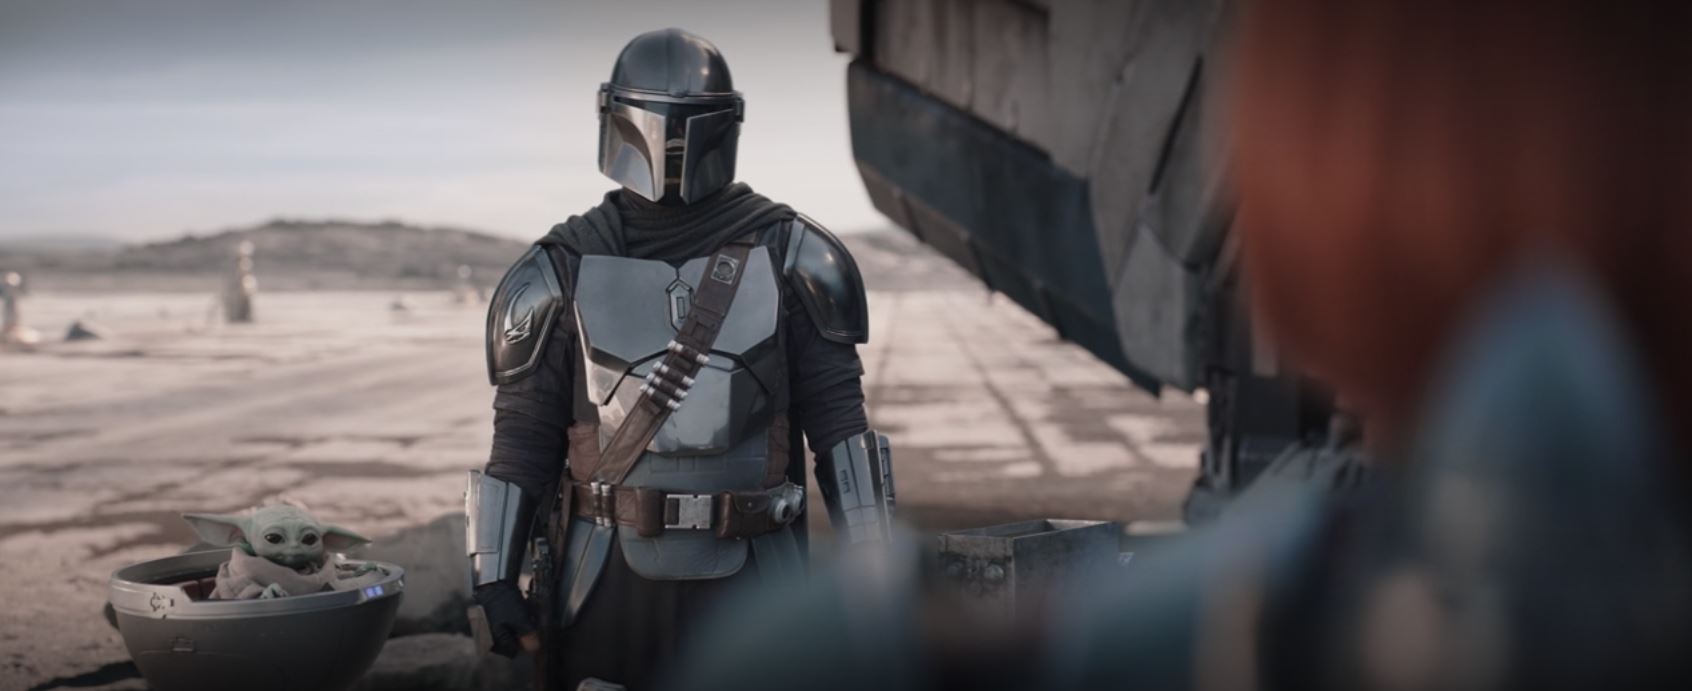 Grogu and Pedro Pascal as Din Djarin in The Mandalorian 3x05. Courtesy of Lucasflm and Disney Plus.